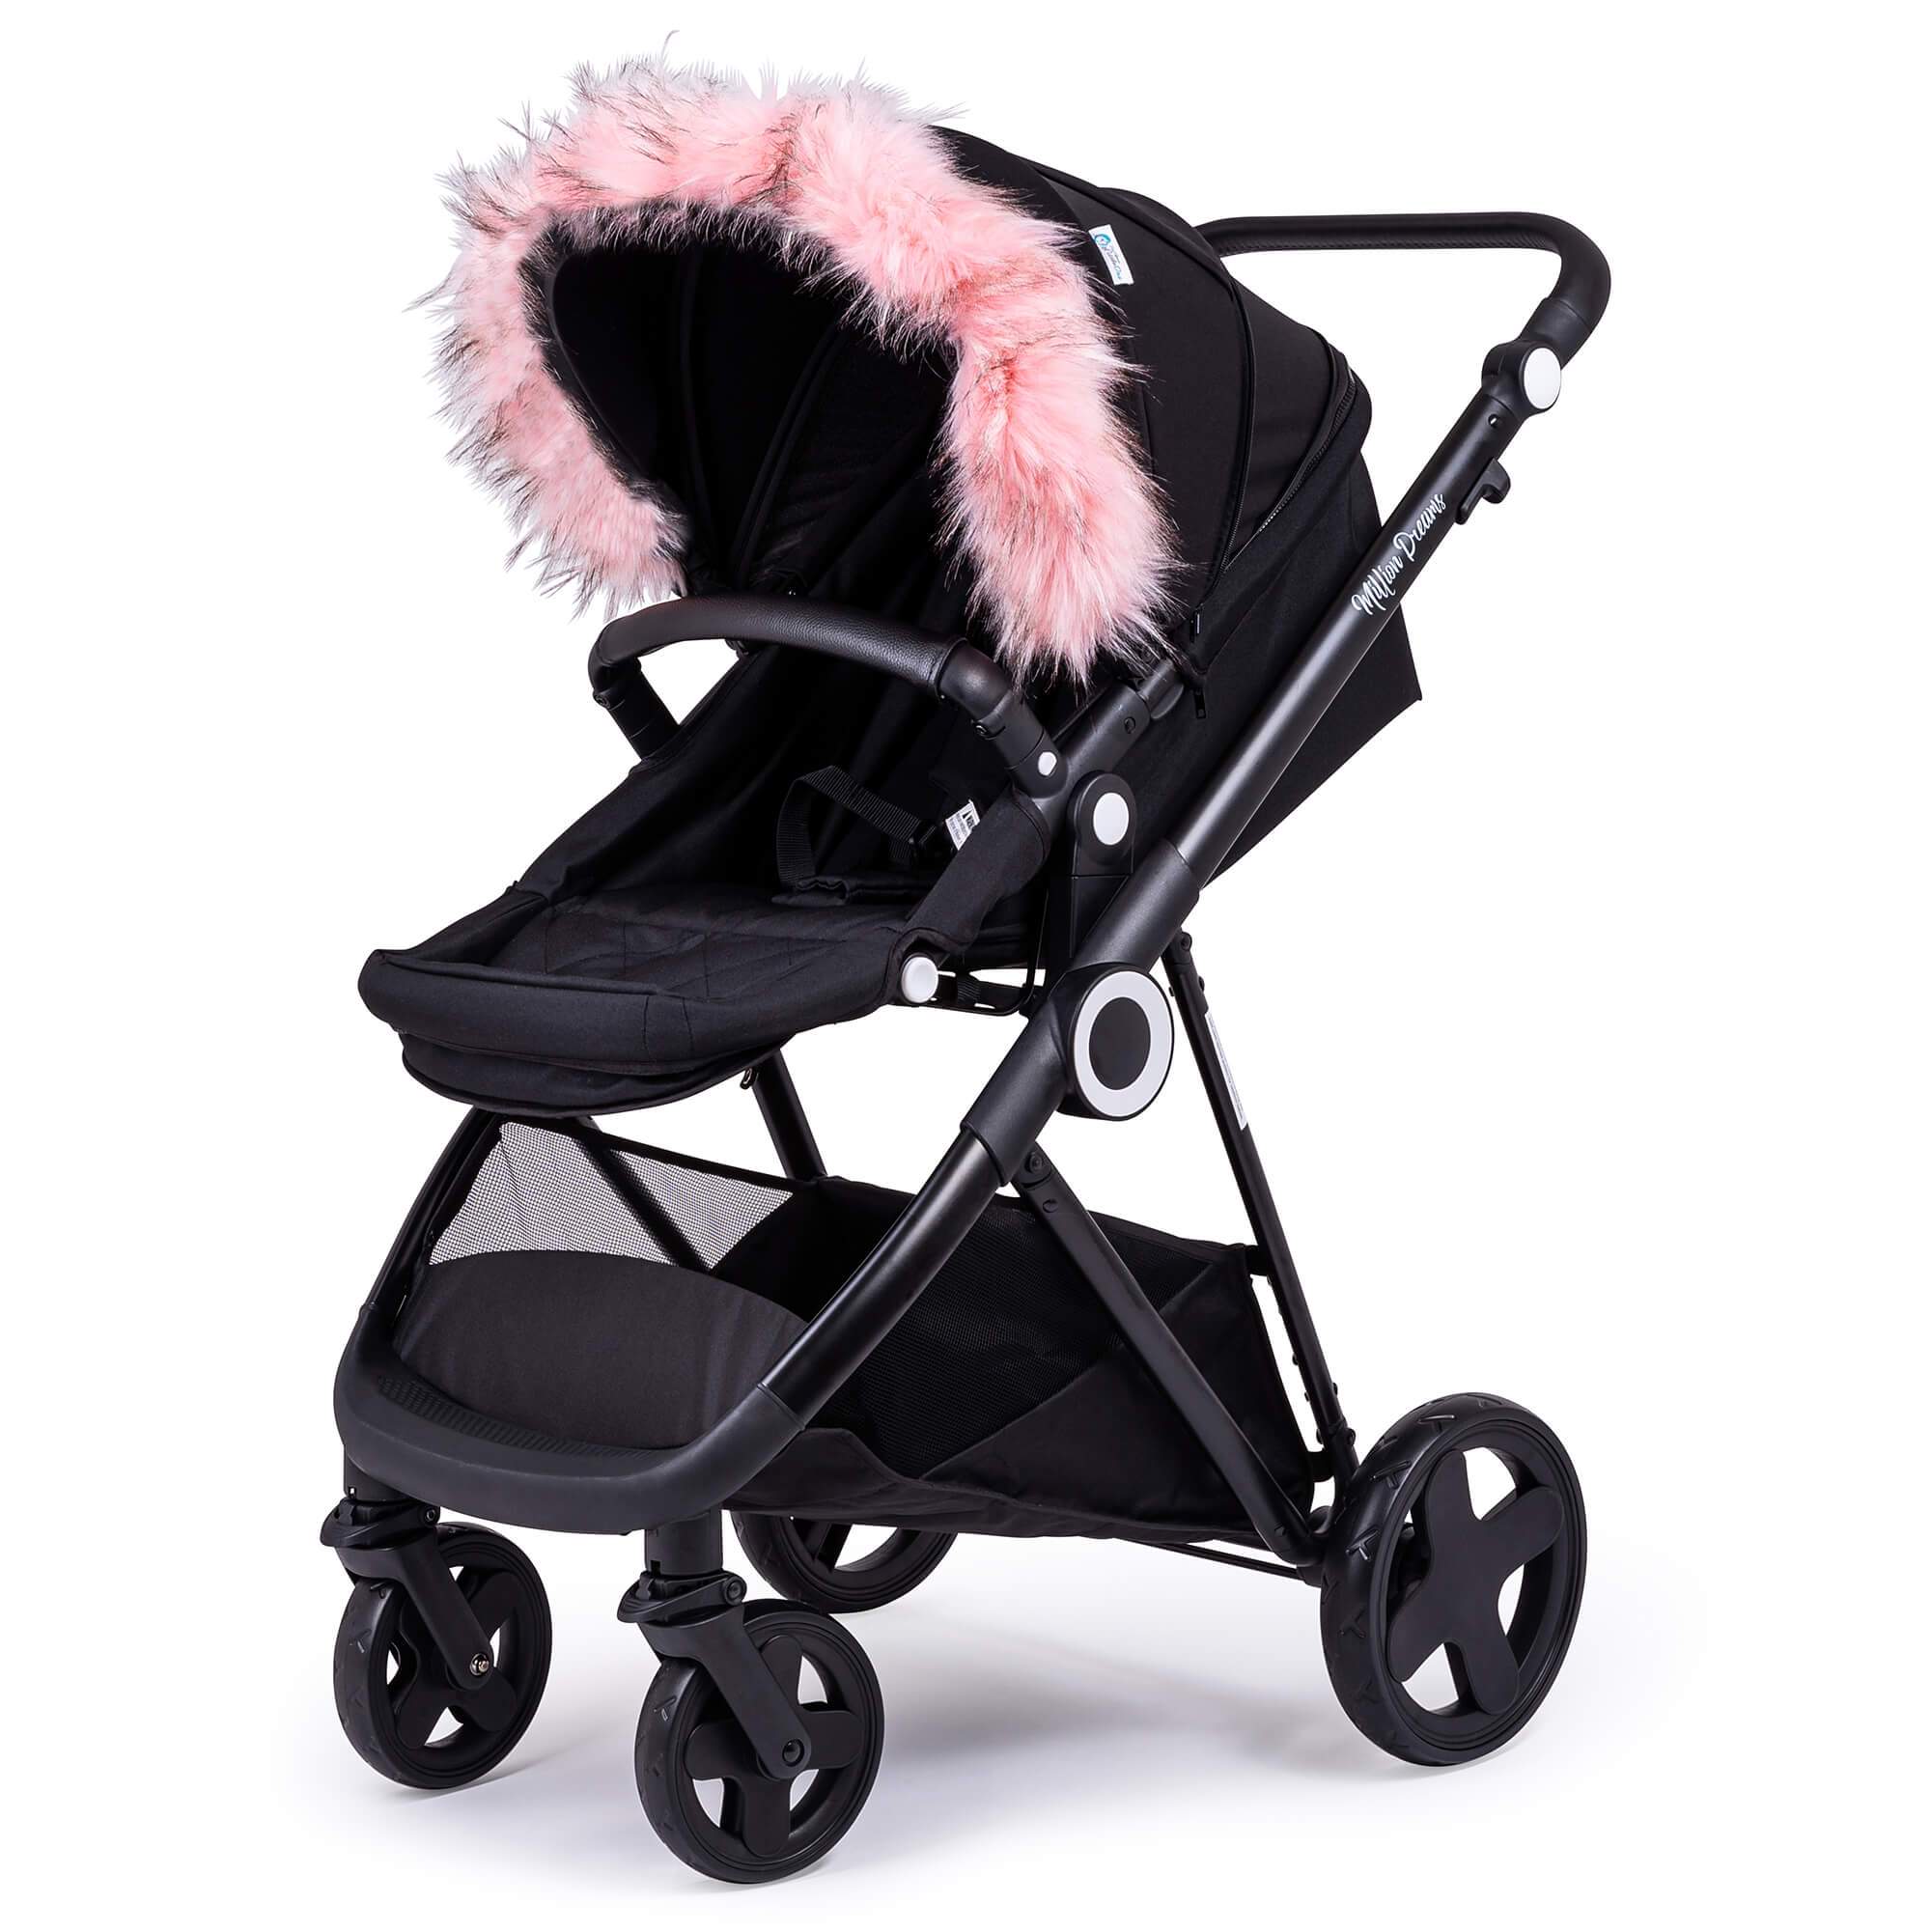 Pram Fur Hood Trim Attachment for Pushchair Compatible with Babywelt - Light Pink / Fits All Models | For Your Little One